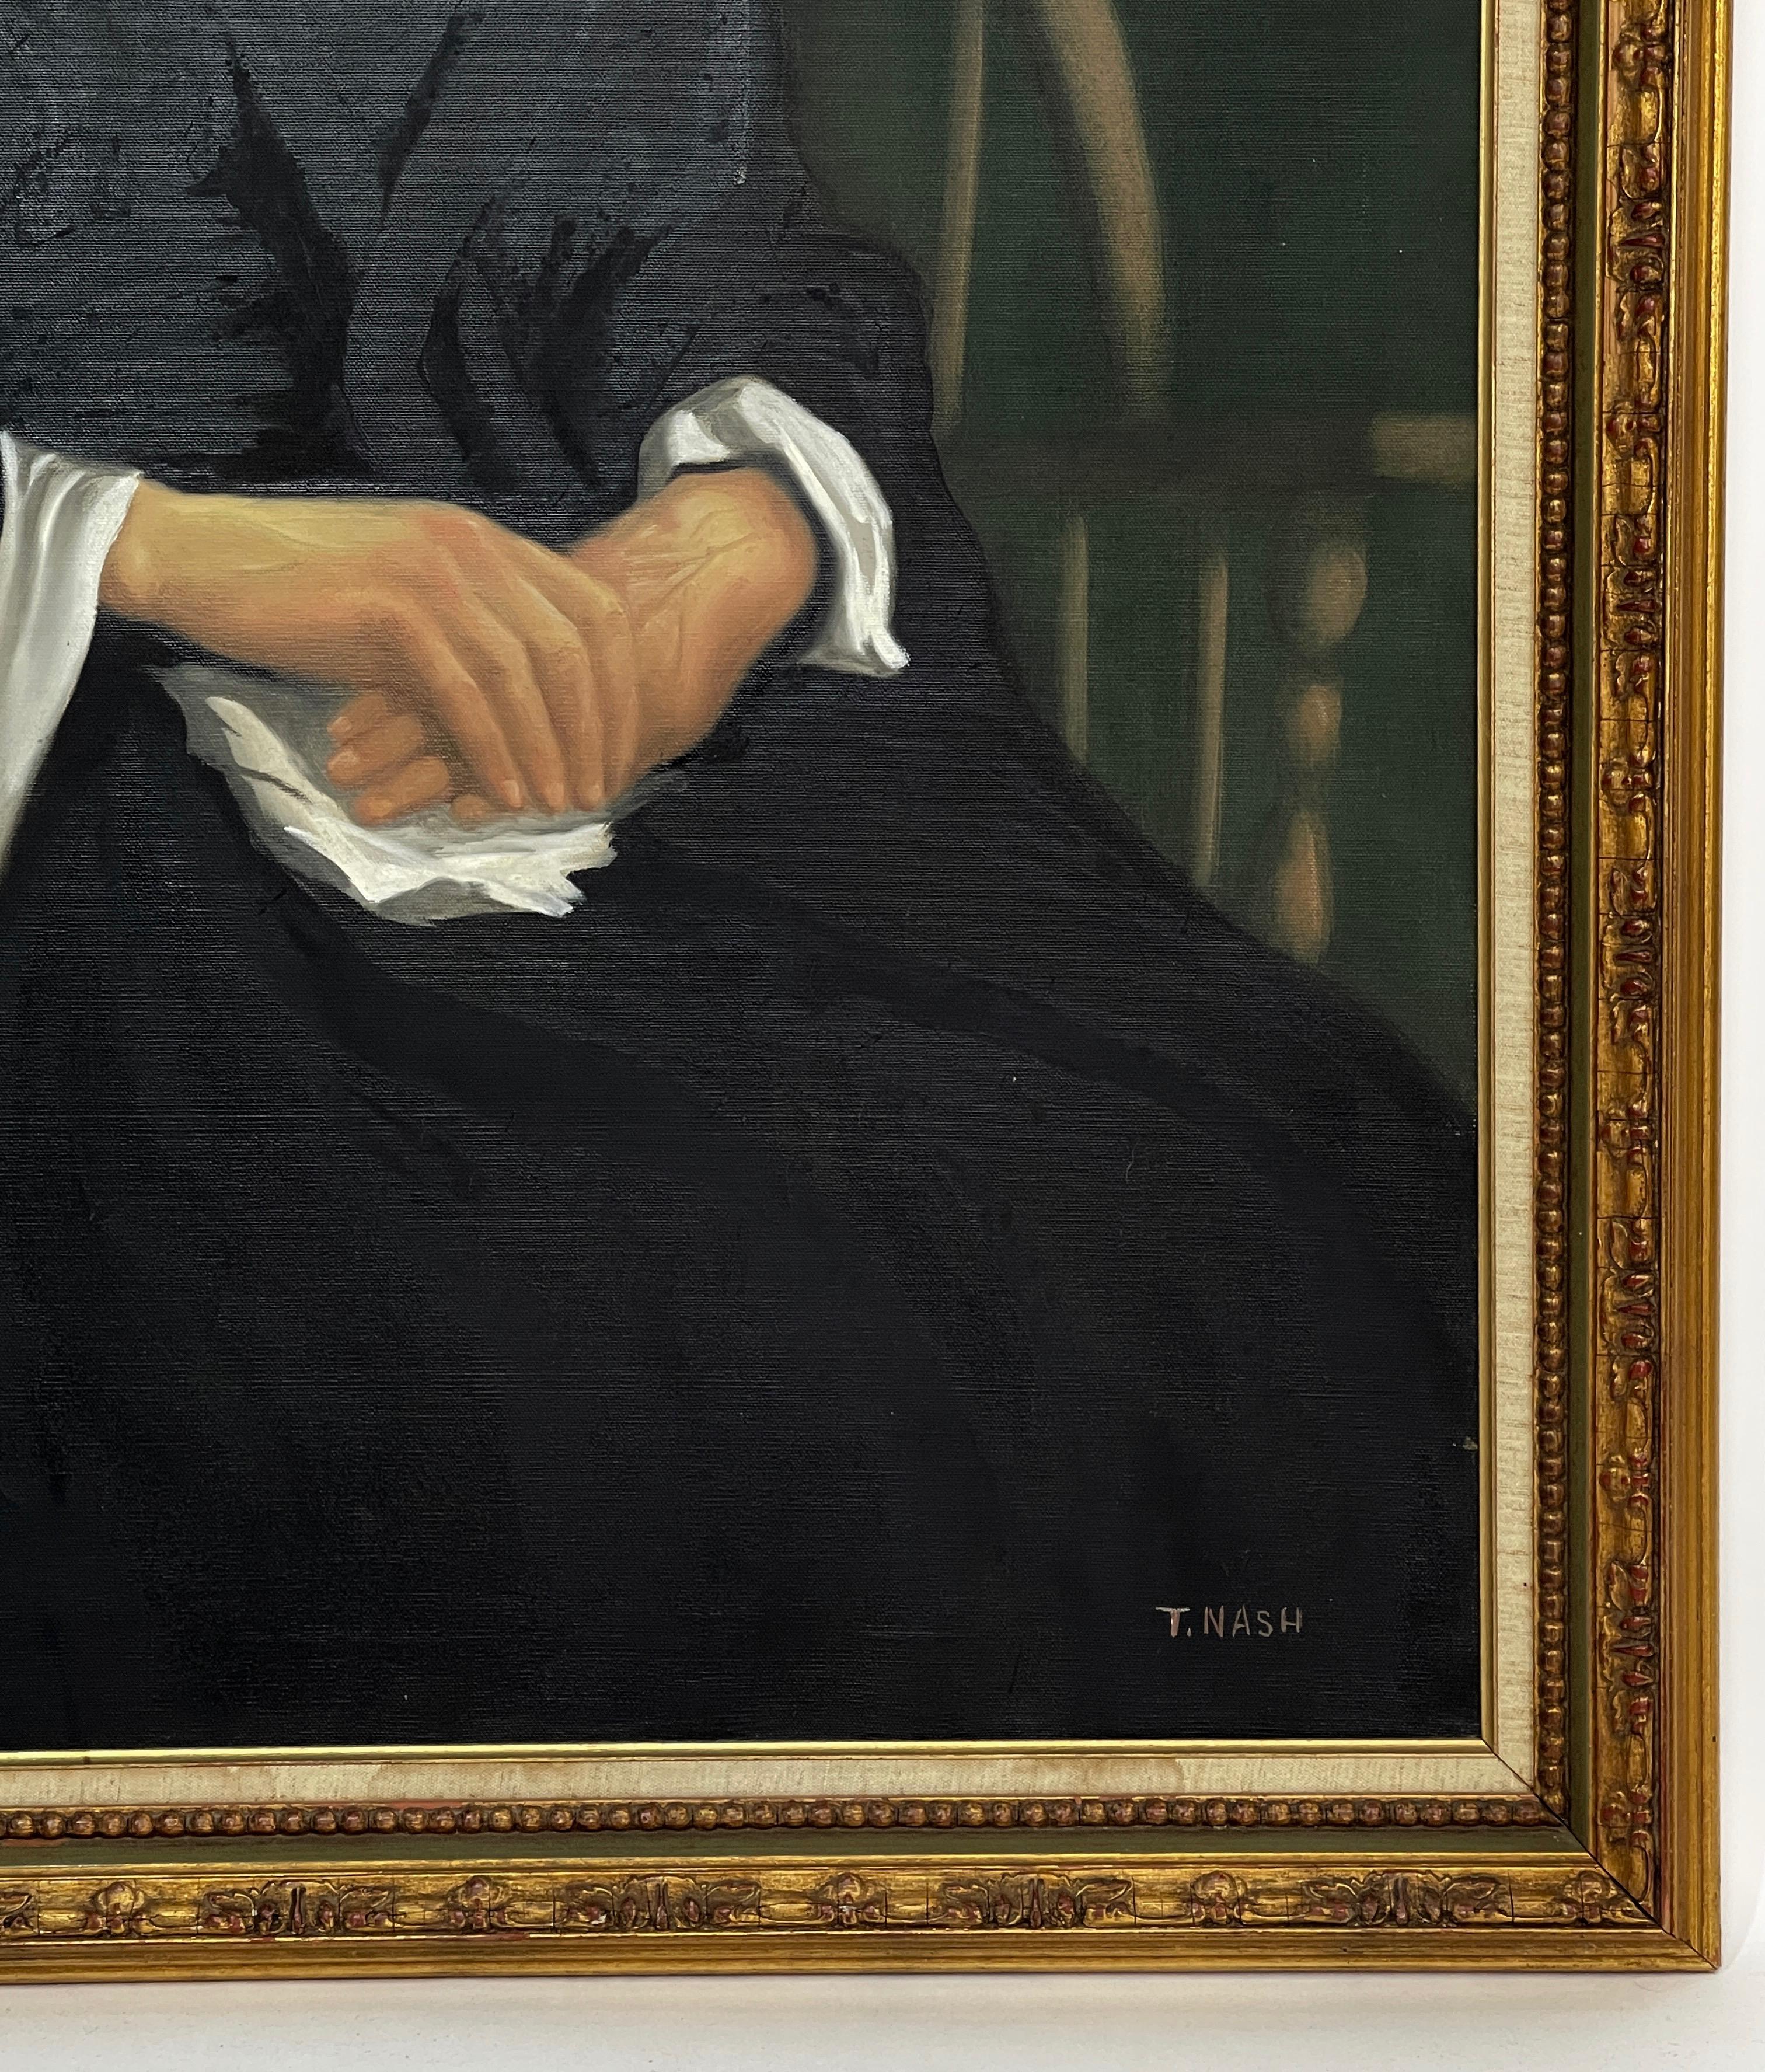 Lovely large scale painting signed: T. Nash. Early American portrait of an elderly woman would look lovely in a modern or classical setting. Her dress is reminiscent of Whistler's mother. Beautiful deep colors in this beautiful painting in a